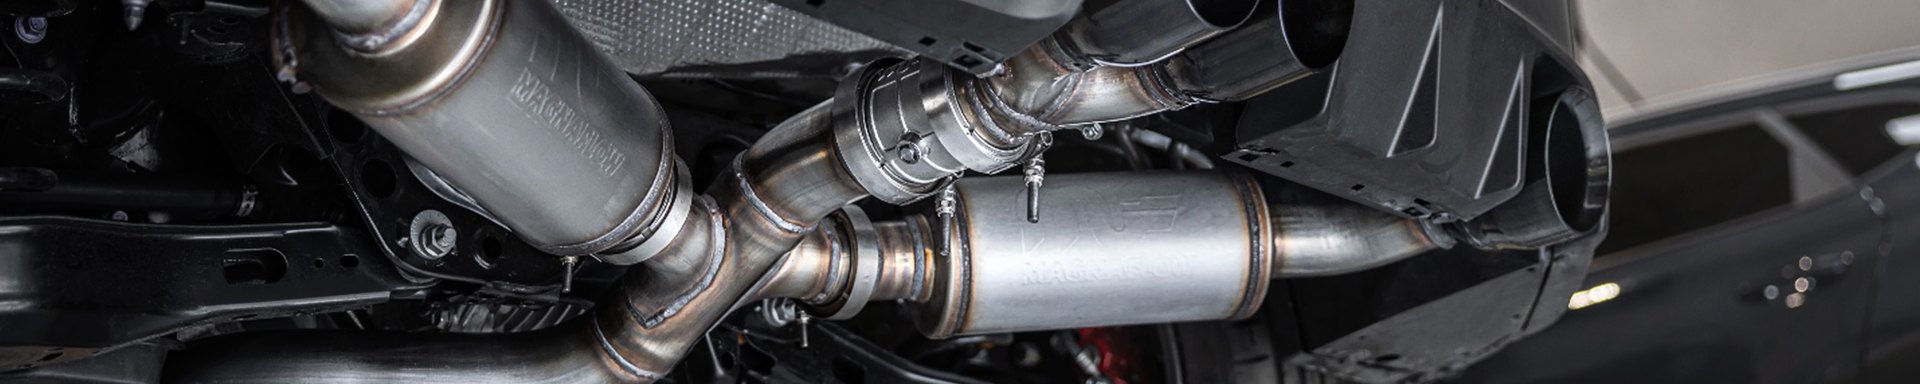 Chevy Camaro Performance Exhaust Systems